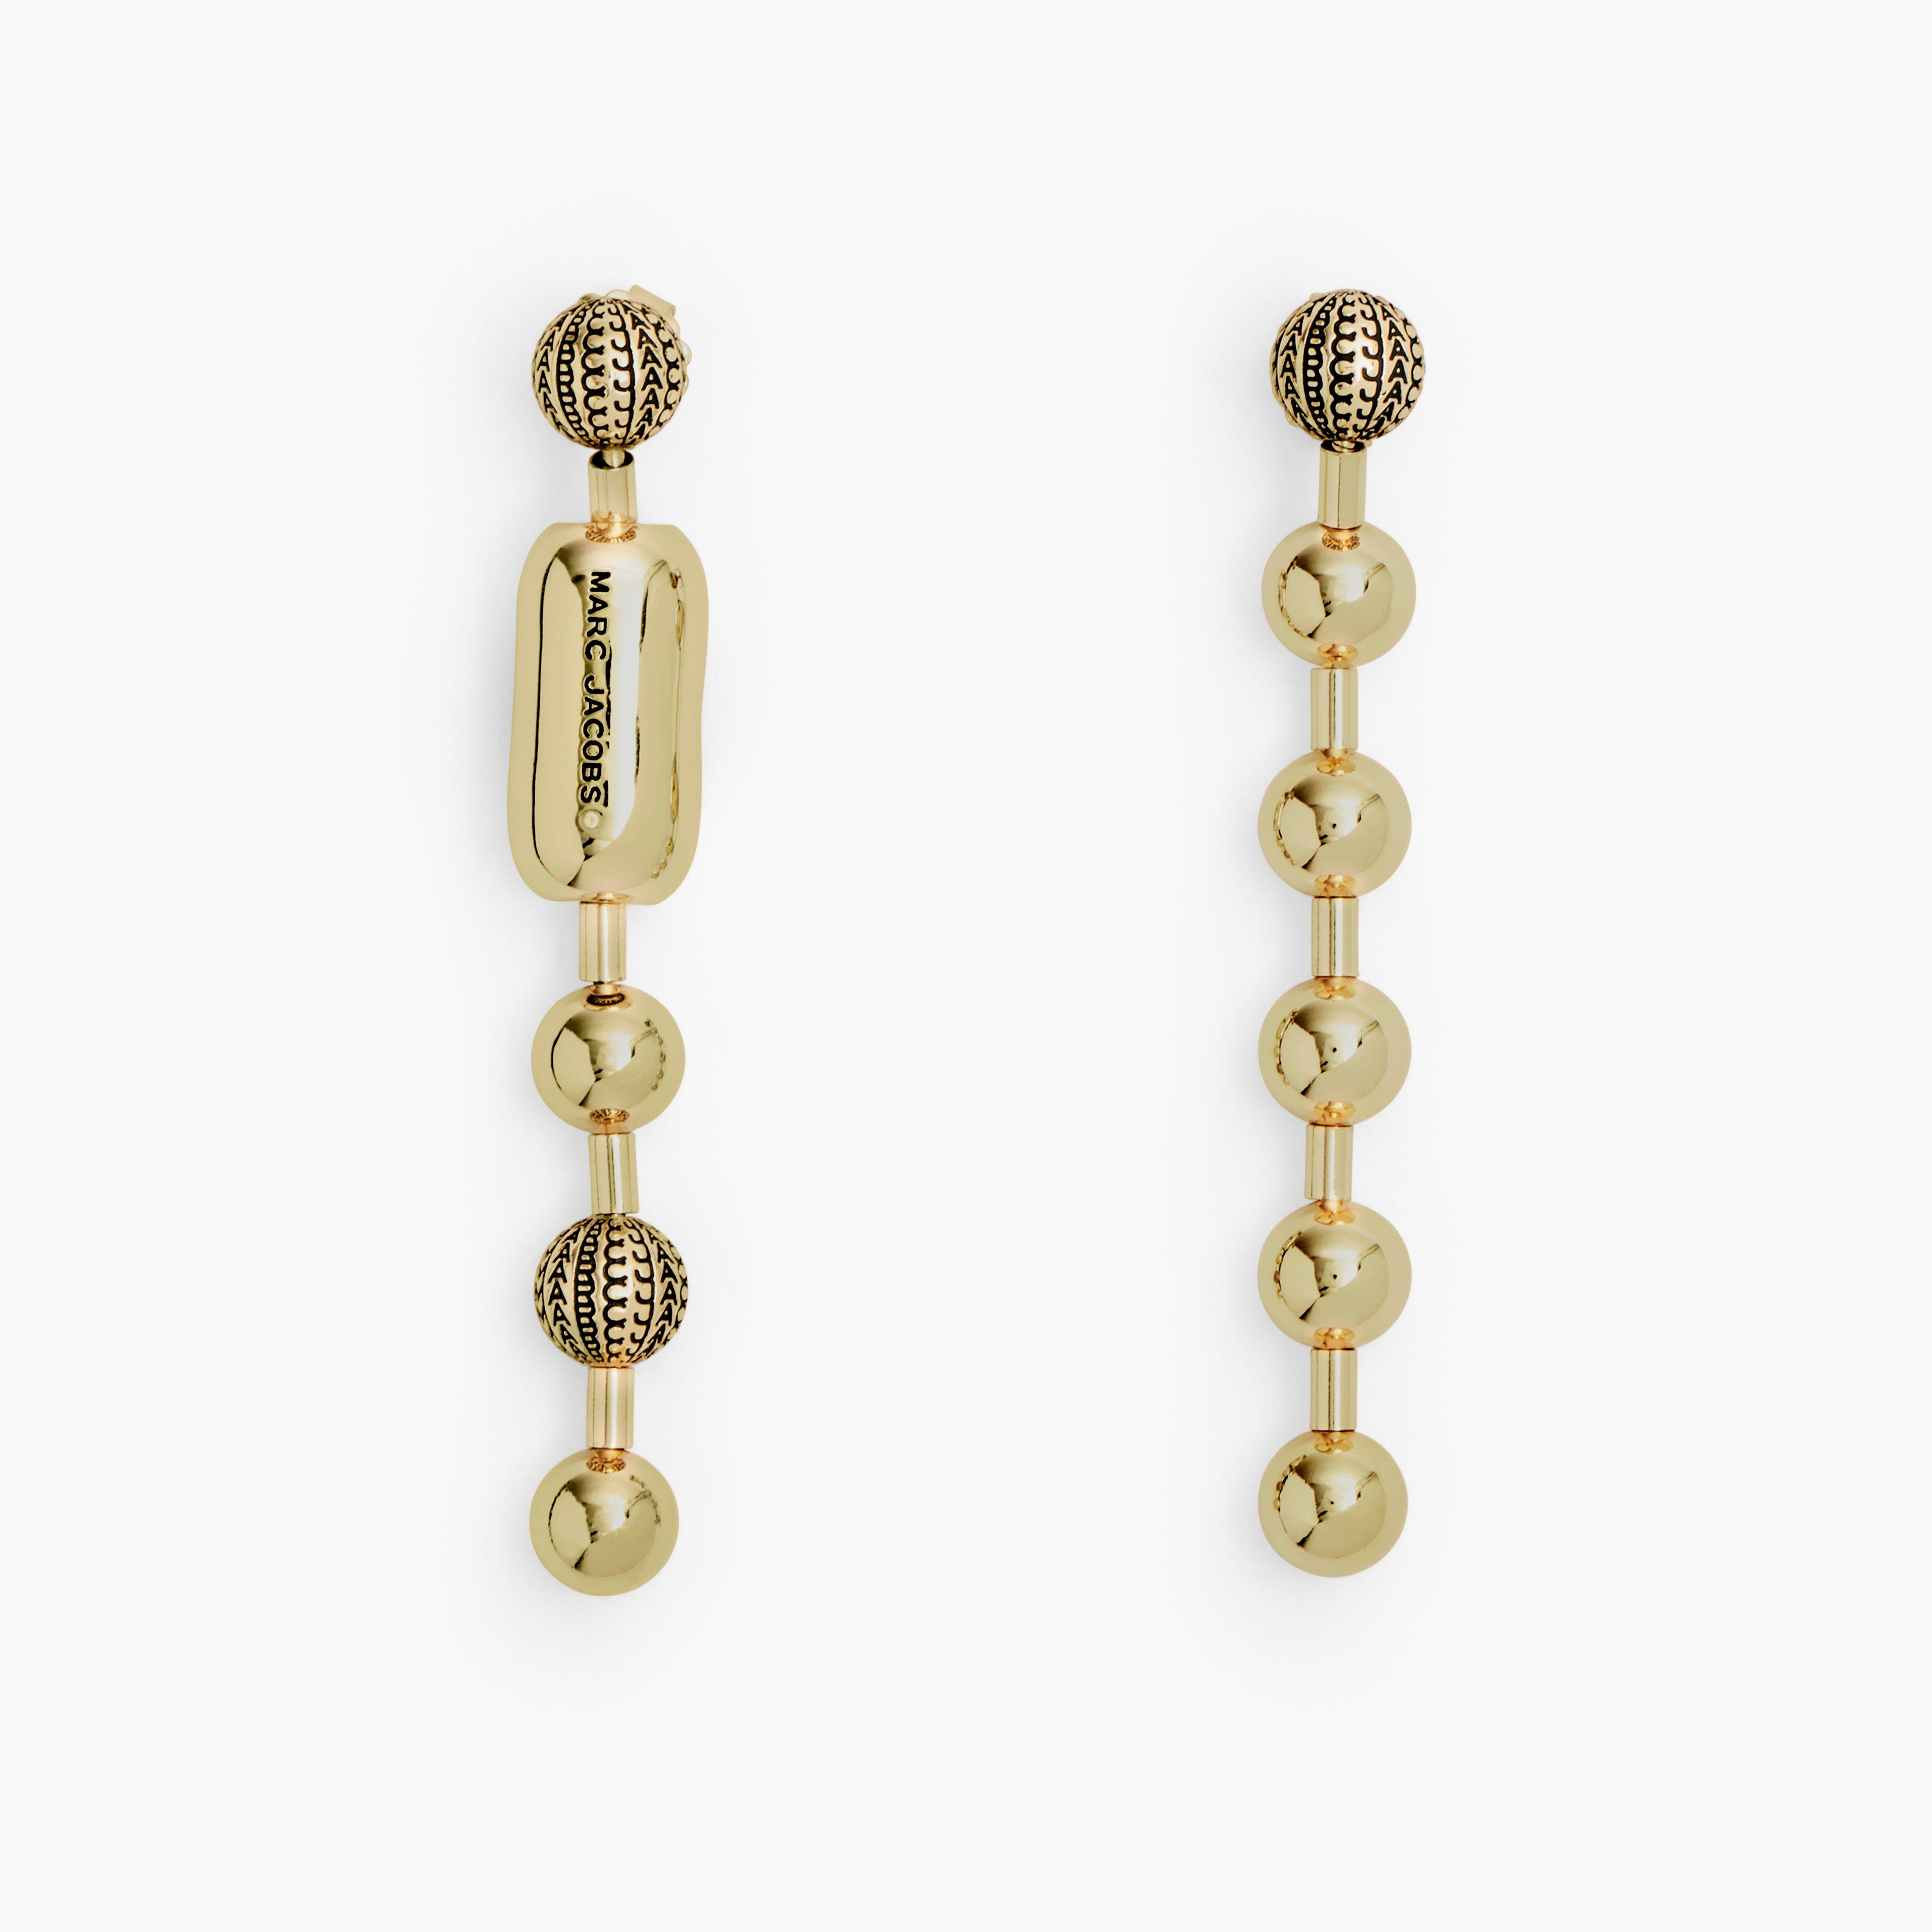 Marc by Marc jacobs The Monogram Ball Chain Earrings,LIGHT ANTIQUE GOLD